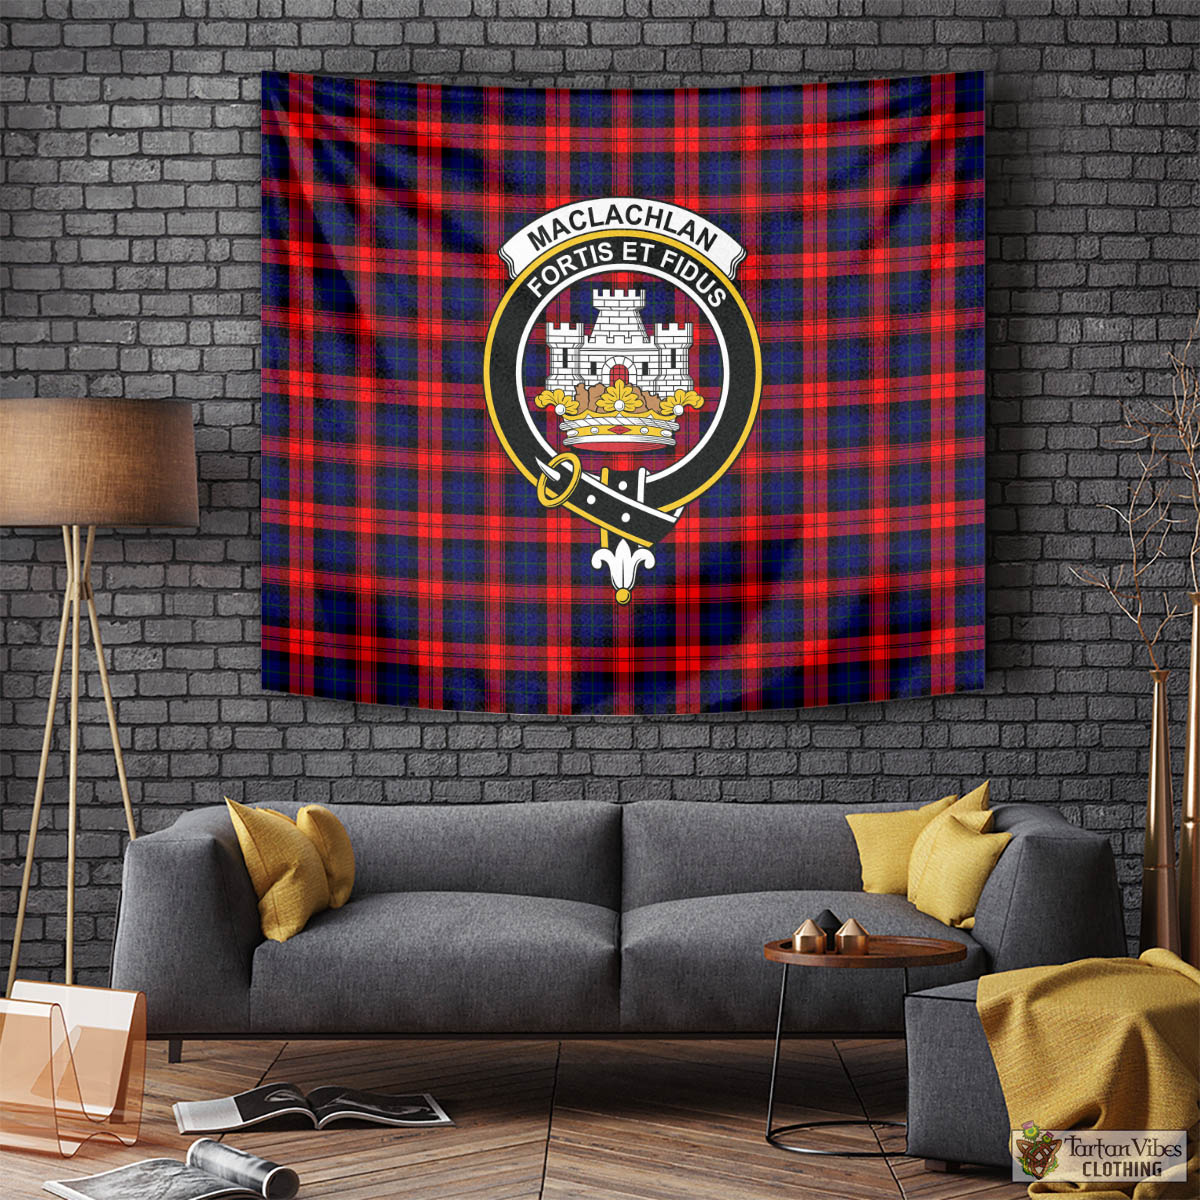 Tartan Vibes Clothing MacLachlan Modern Tartan Tapestry Wall Hanging and Home Decor for Room with Family Crest